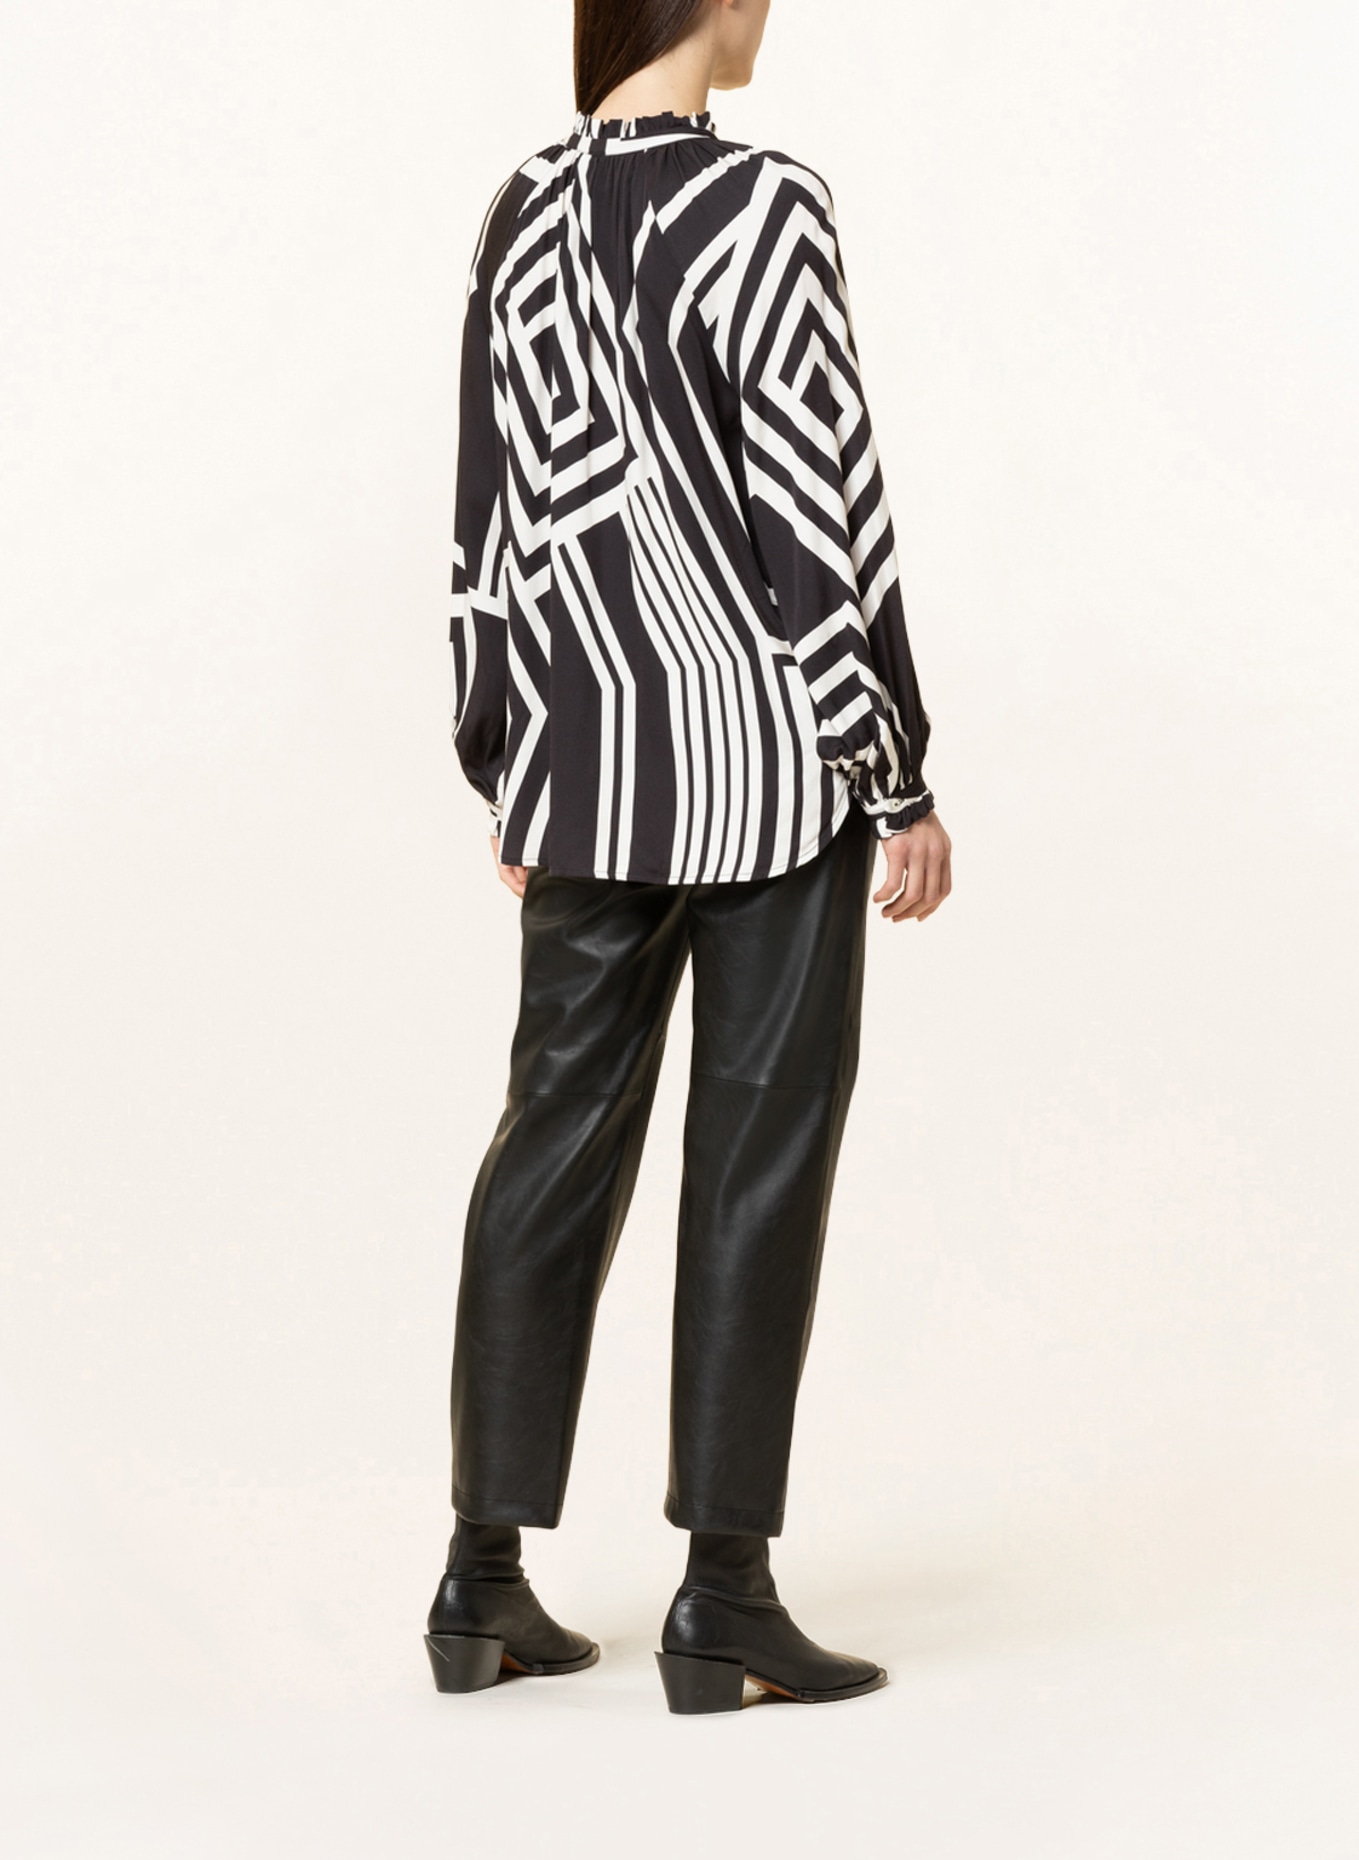 TONNO & PANNA Blouse-style shirt HERMINE with ruffles, Color: BLACK/ WHITE (Image 3)